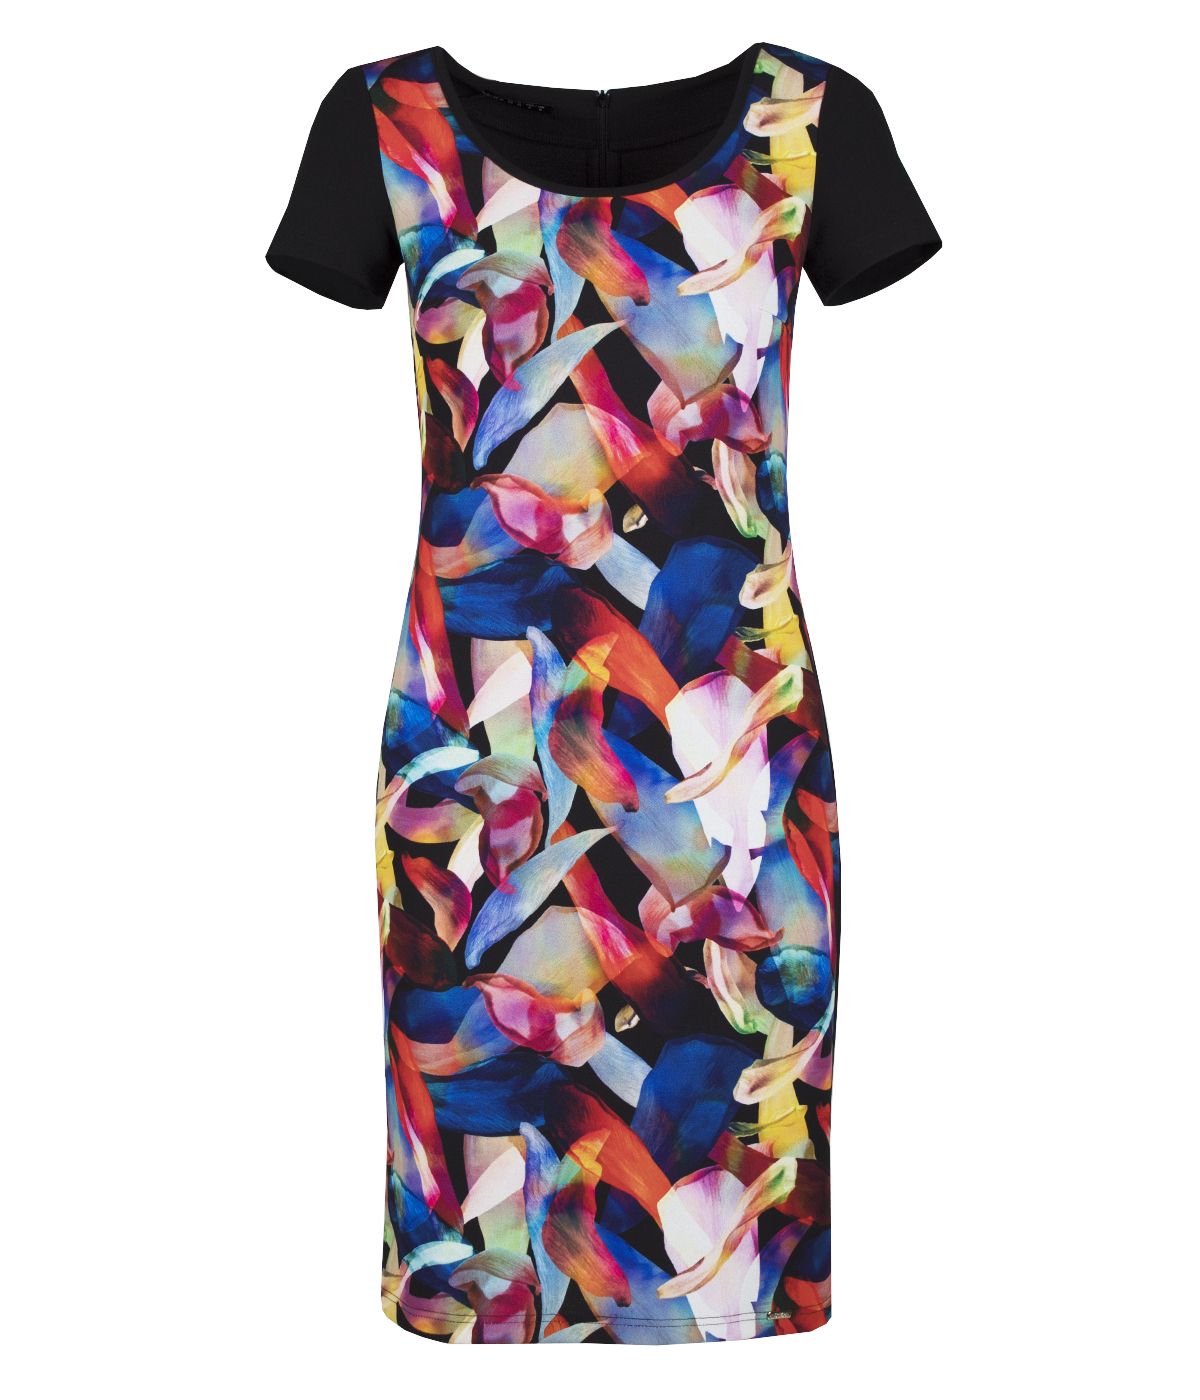 Short-sleeved round neck dress with abstract print 0